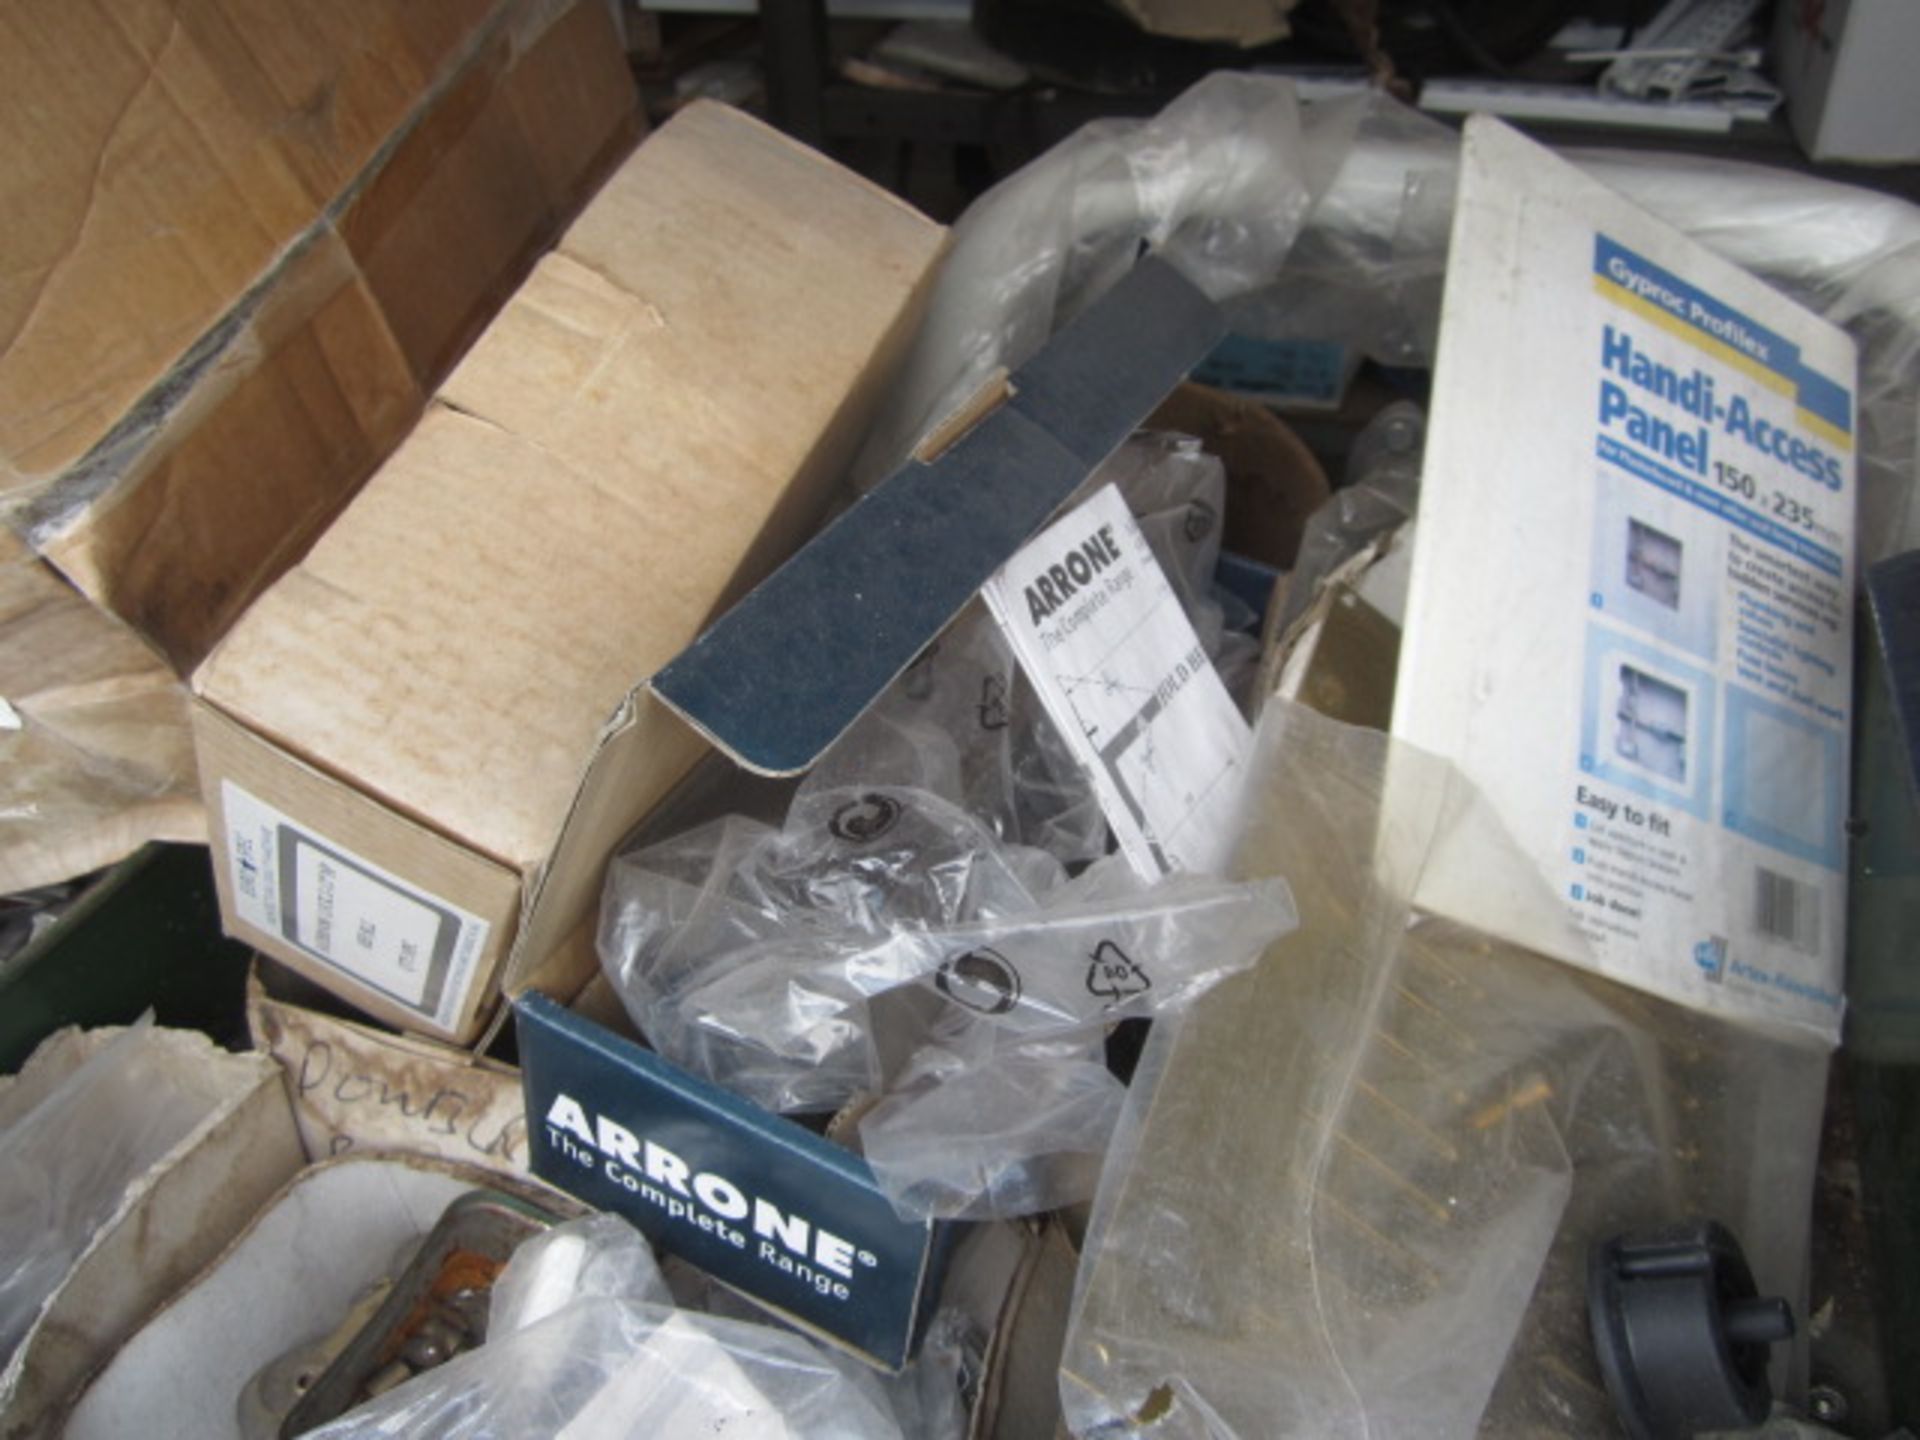 Contents of racking including locks, hangers, ironmongery, bolts, architectural hardwear etc. - Image 13 of 18